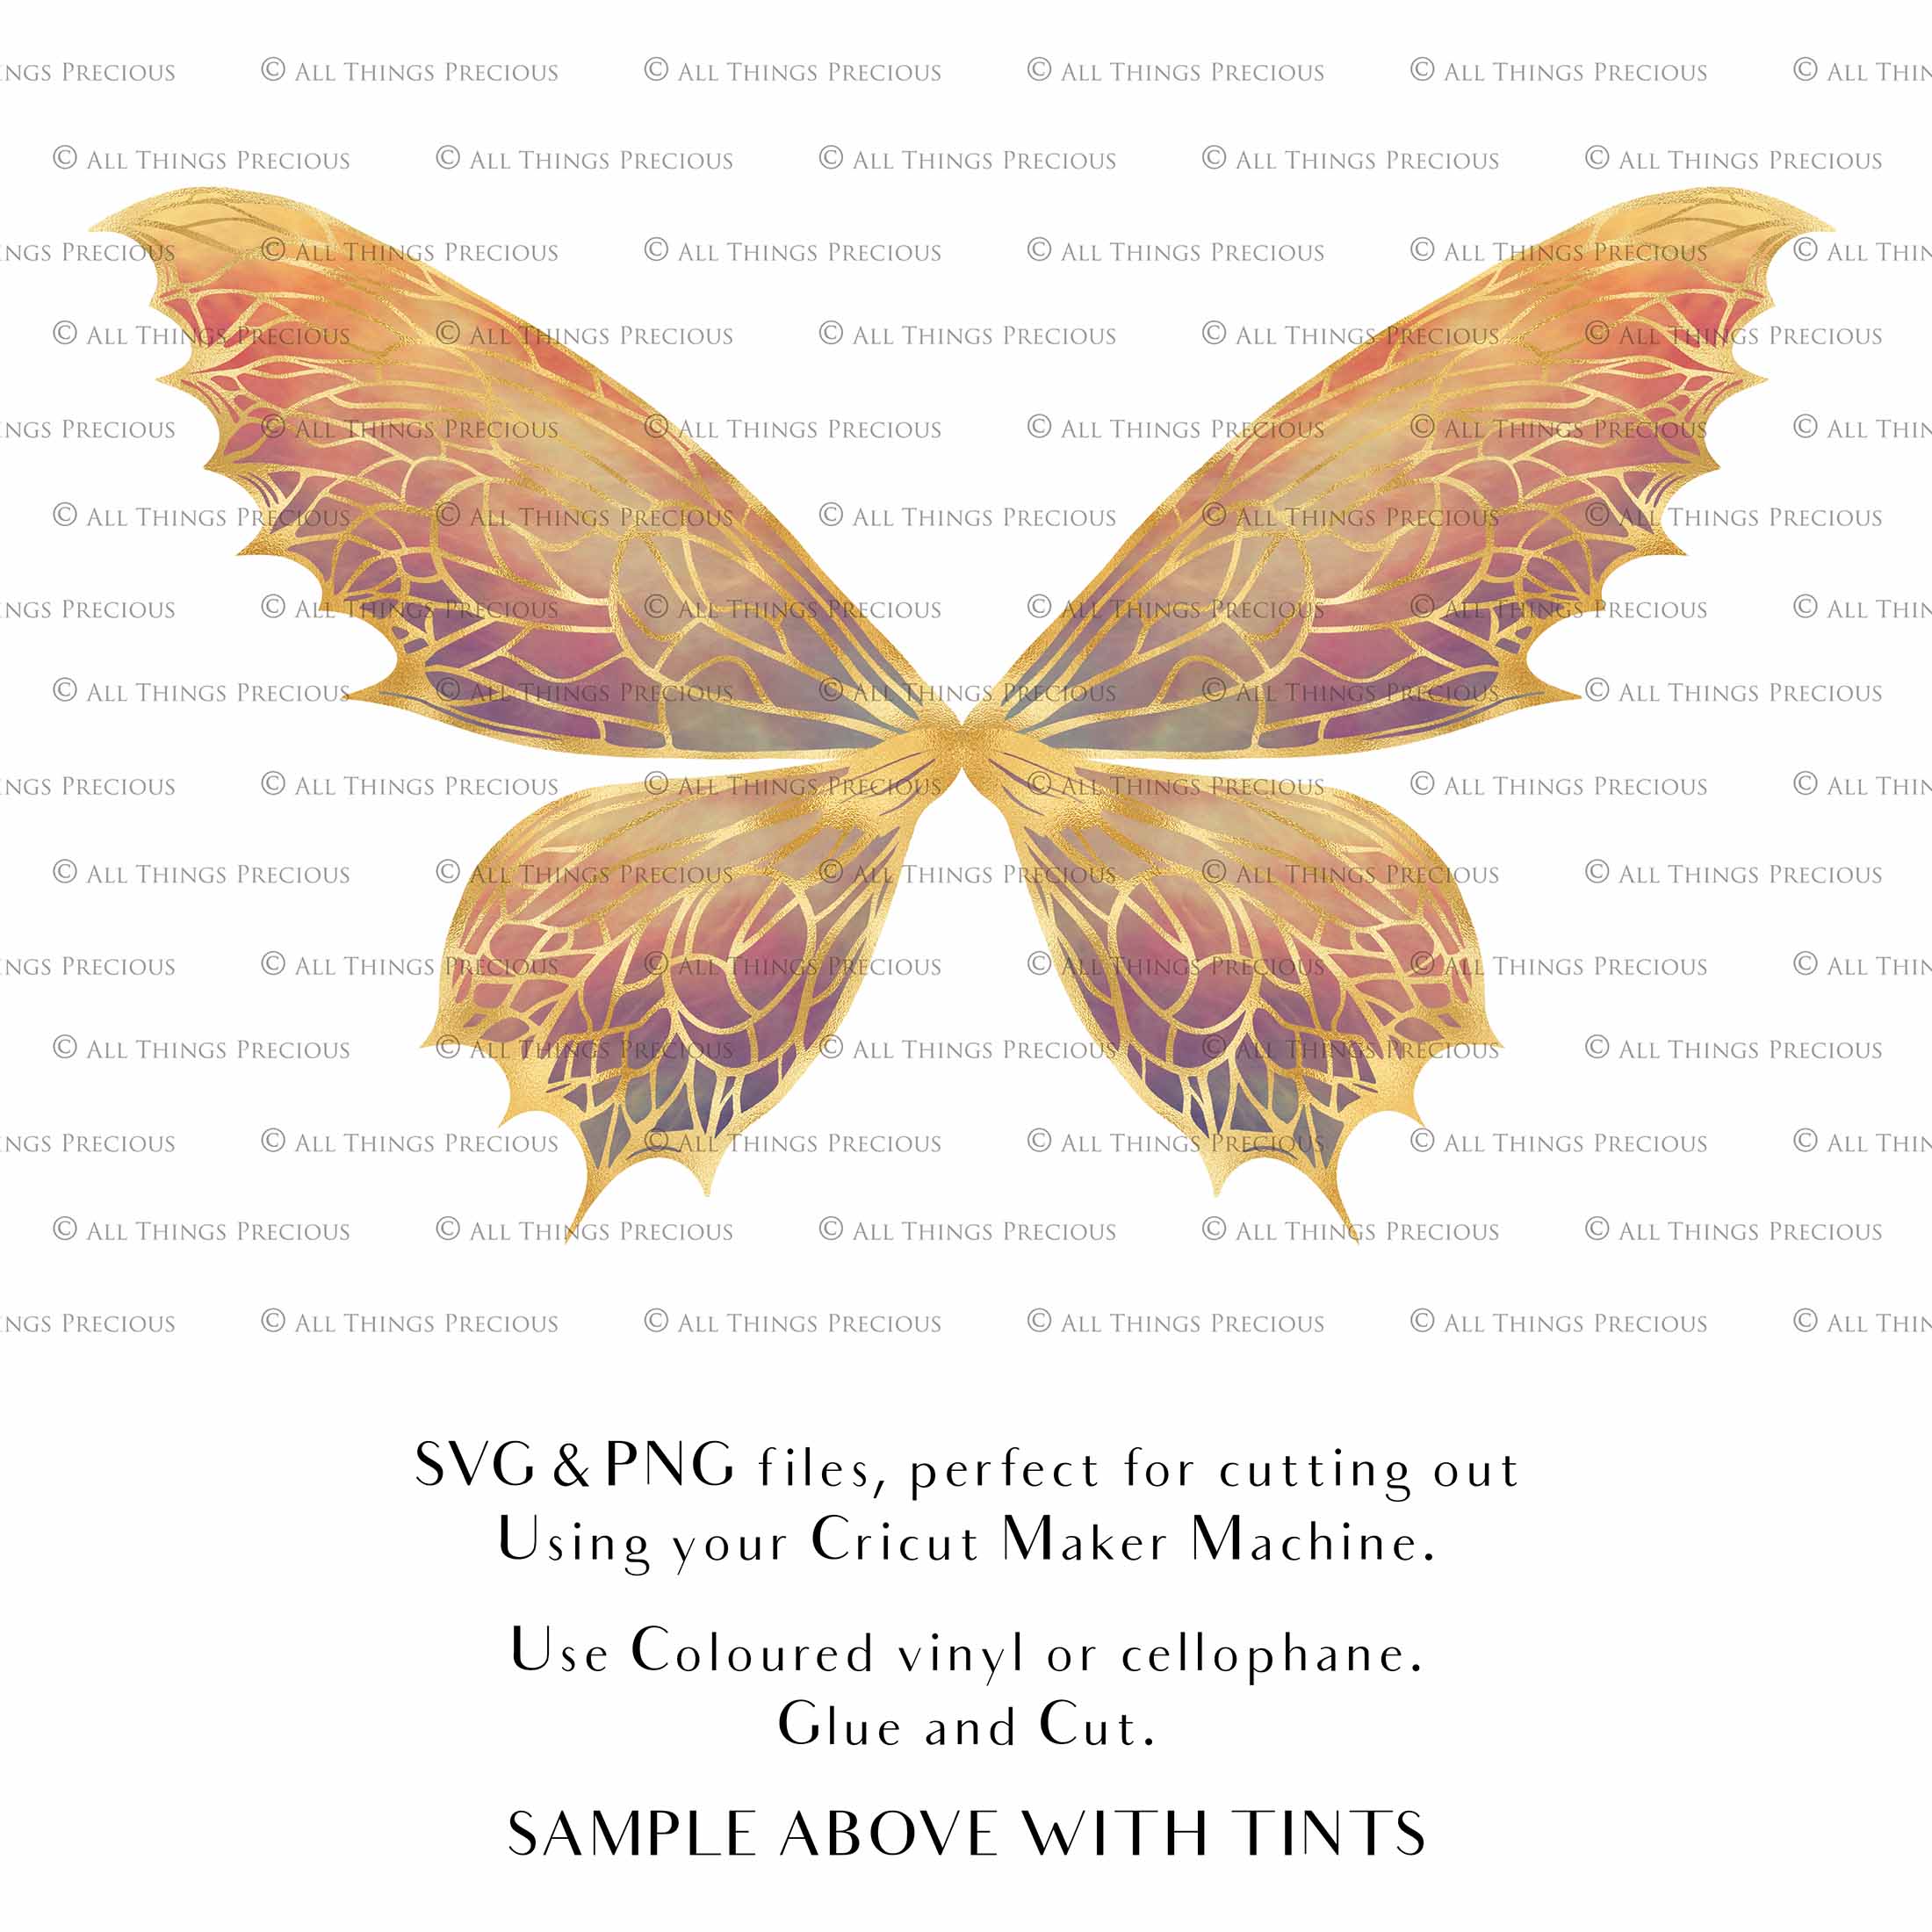 SVG & PNG Fairy/Angel Wing files for Cricut, Silhouette Cameo and other Cutting Machines. Create wearable fairy wings, all sizes. Perfect for Halloween Costumes, Fantasy, Cosplay, Photography. Prints, Wedding, Engagement, Baby Shower invitations, Sublimation Printing, Clip Art and more. Cut and assemble. ATP Textures.